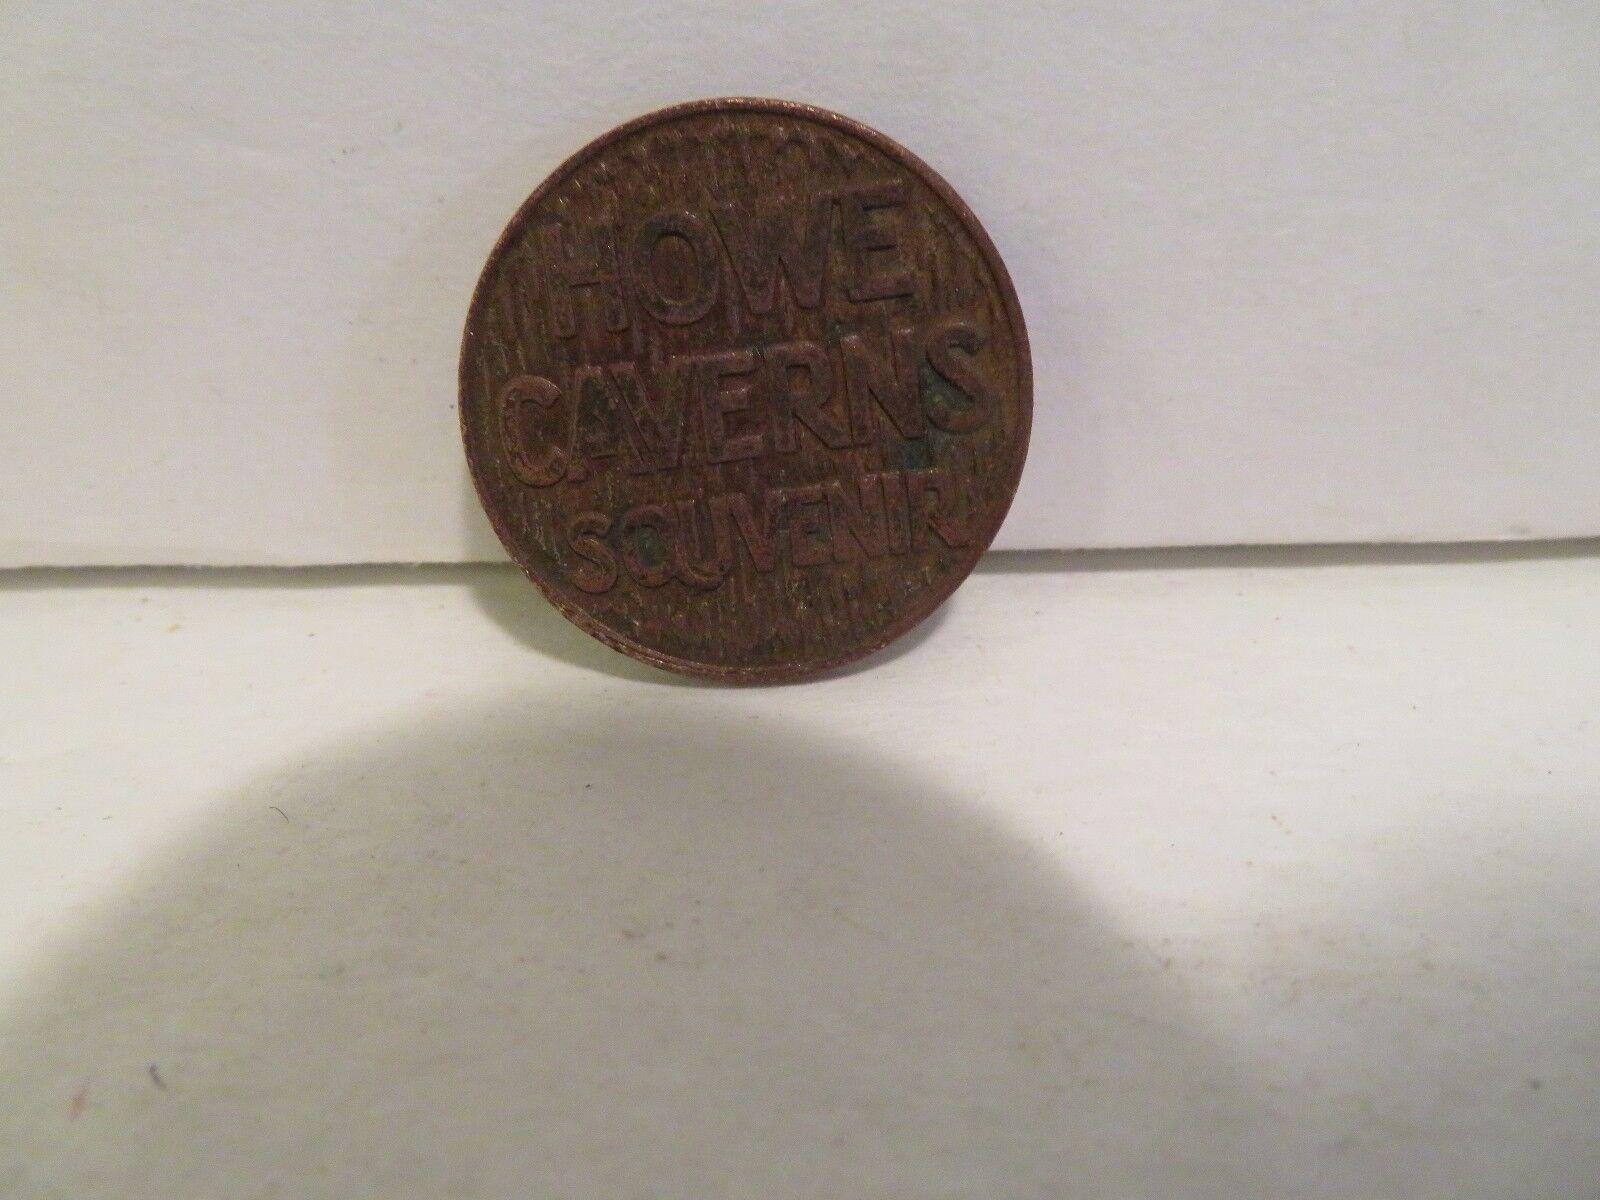 Witch of the Grottoes - Vintage mid-1900's Souvenir Coin Token - Howe Caverns NY